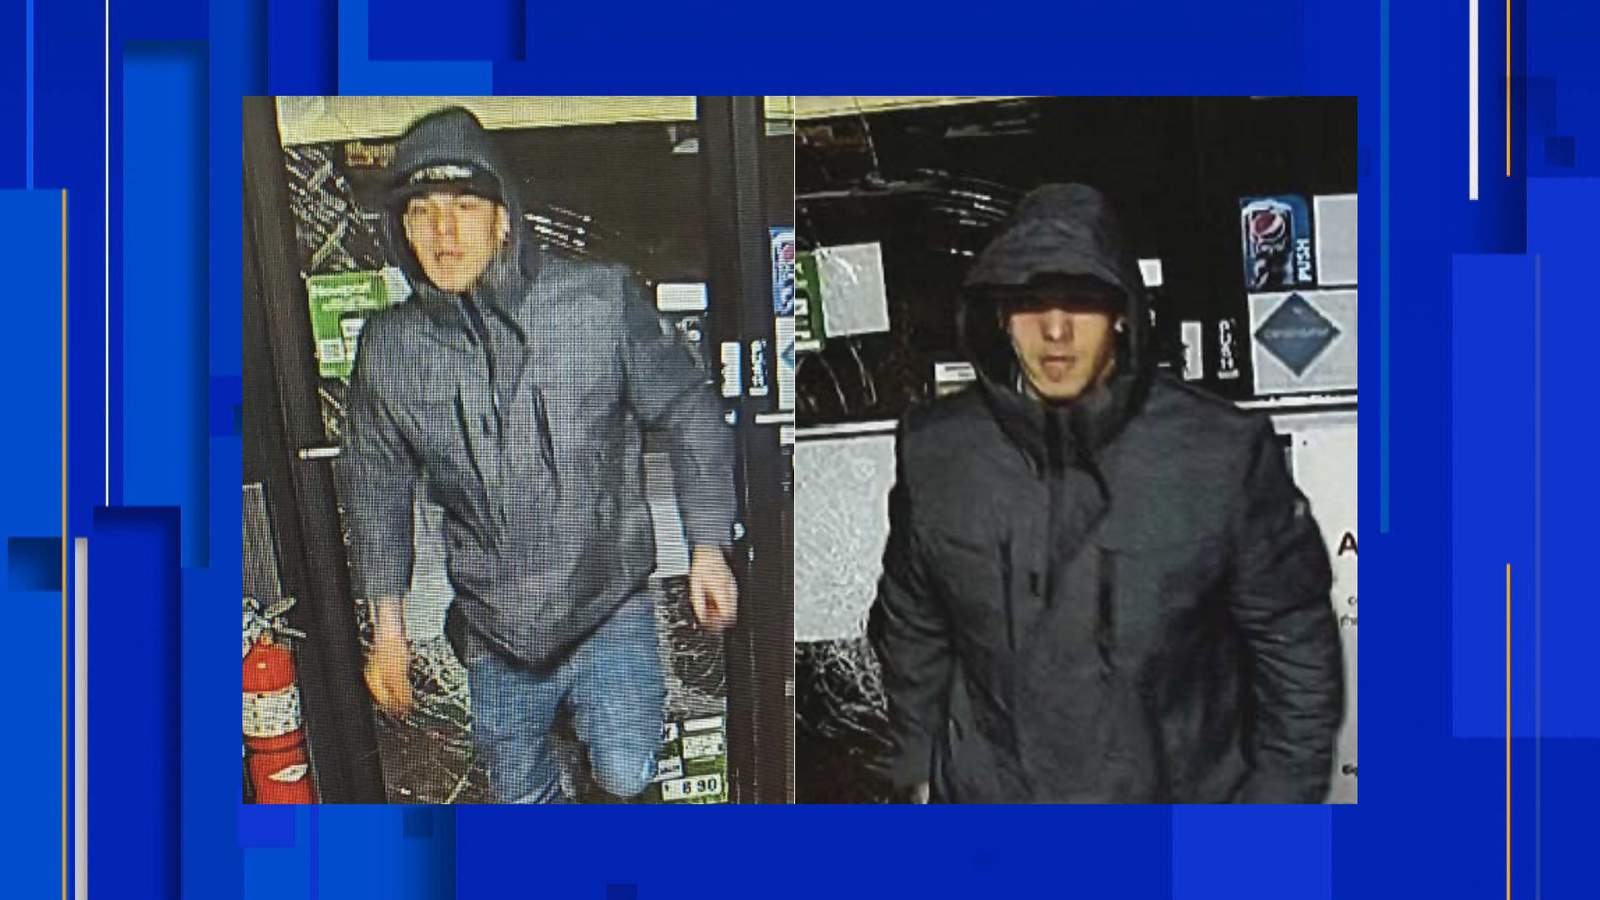 Waterford Township police search for man in connection with breaking into gas station